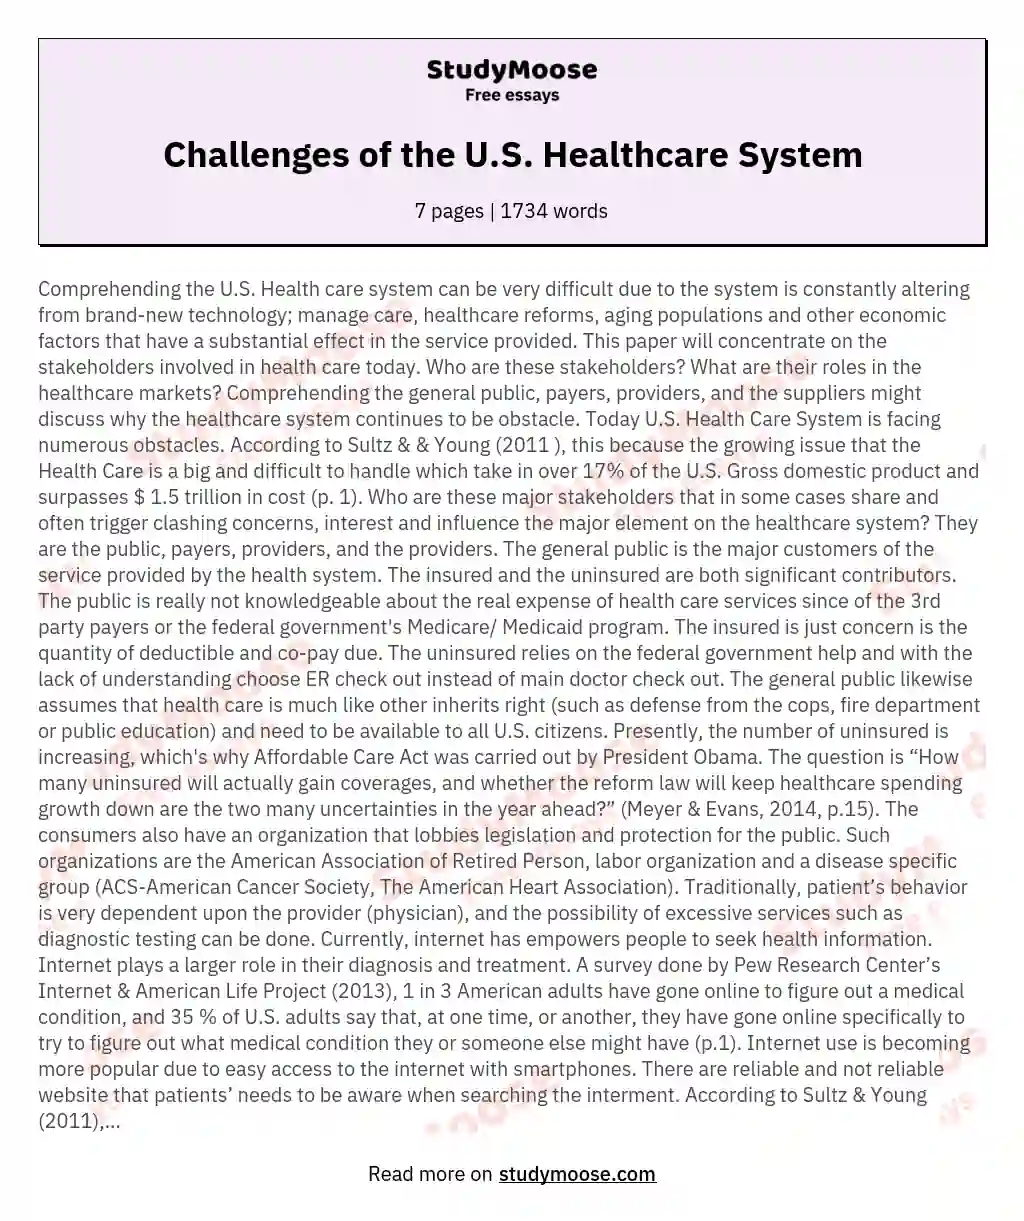 Challenges of the U.S. Healthcare System essay